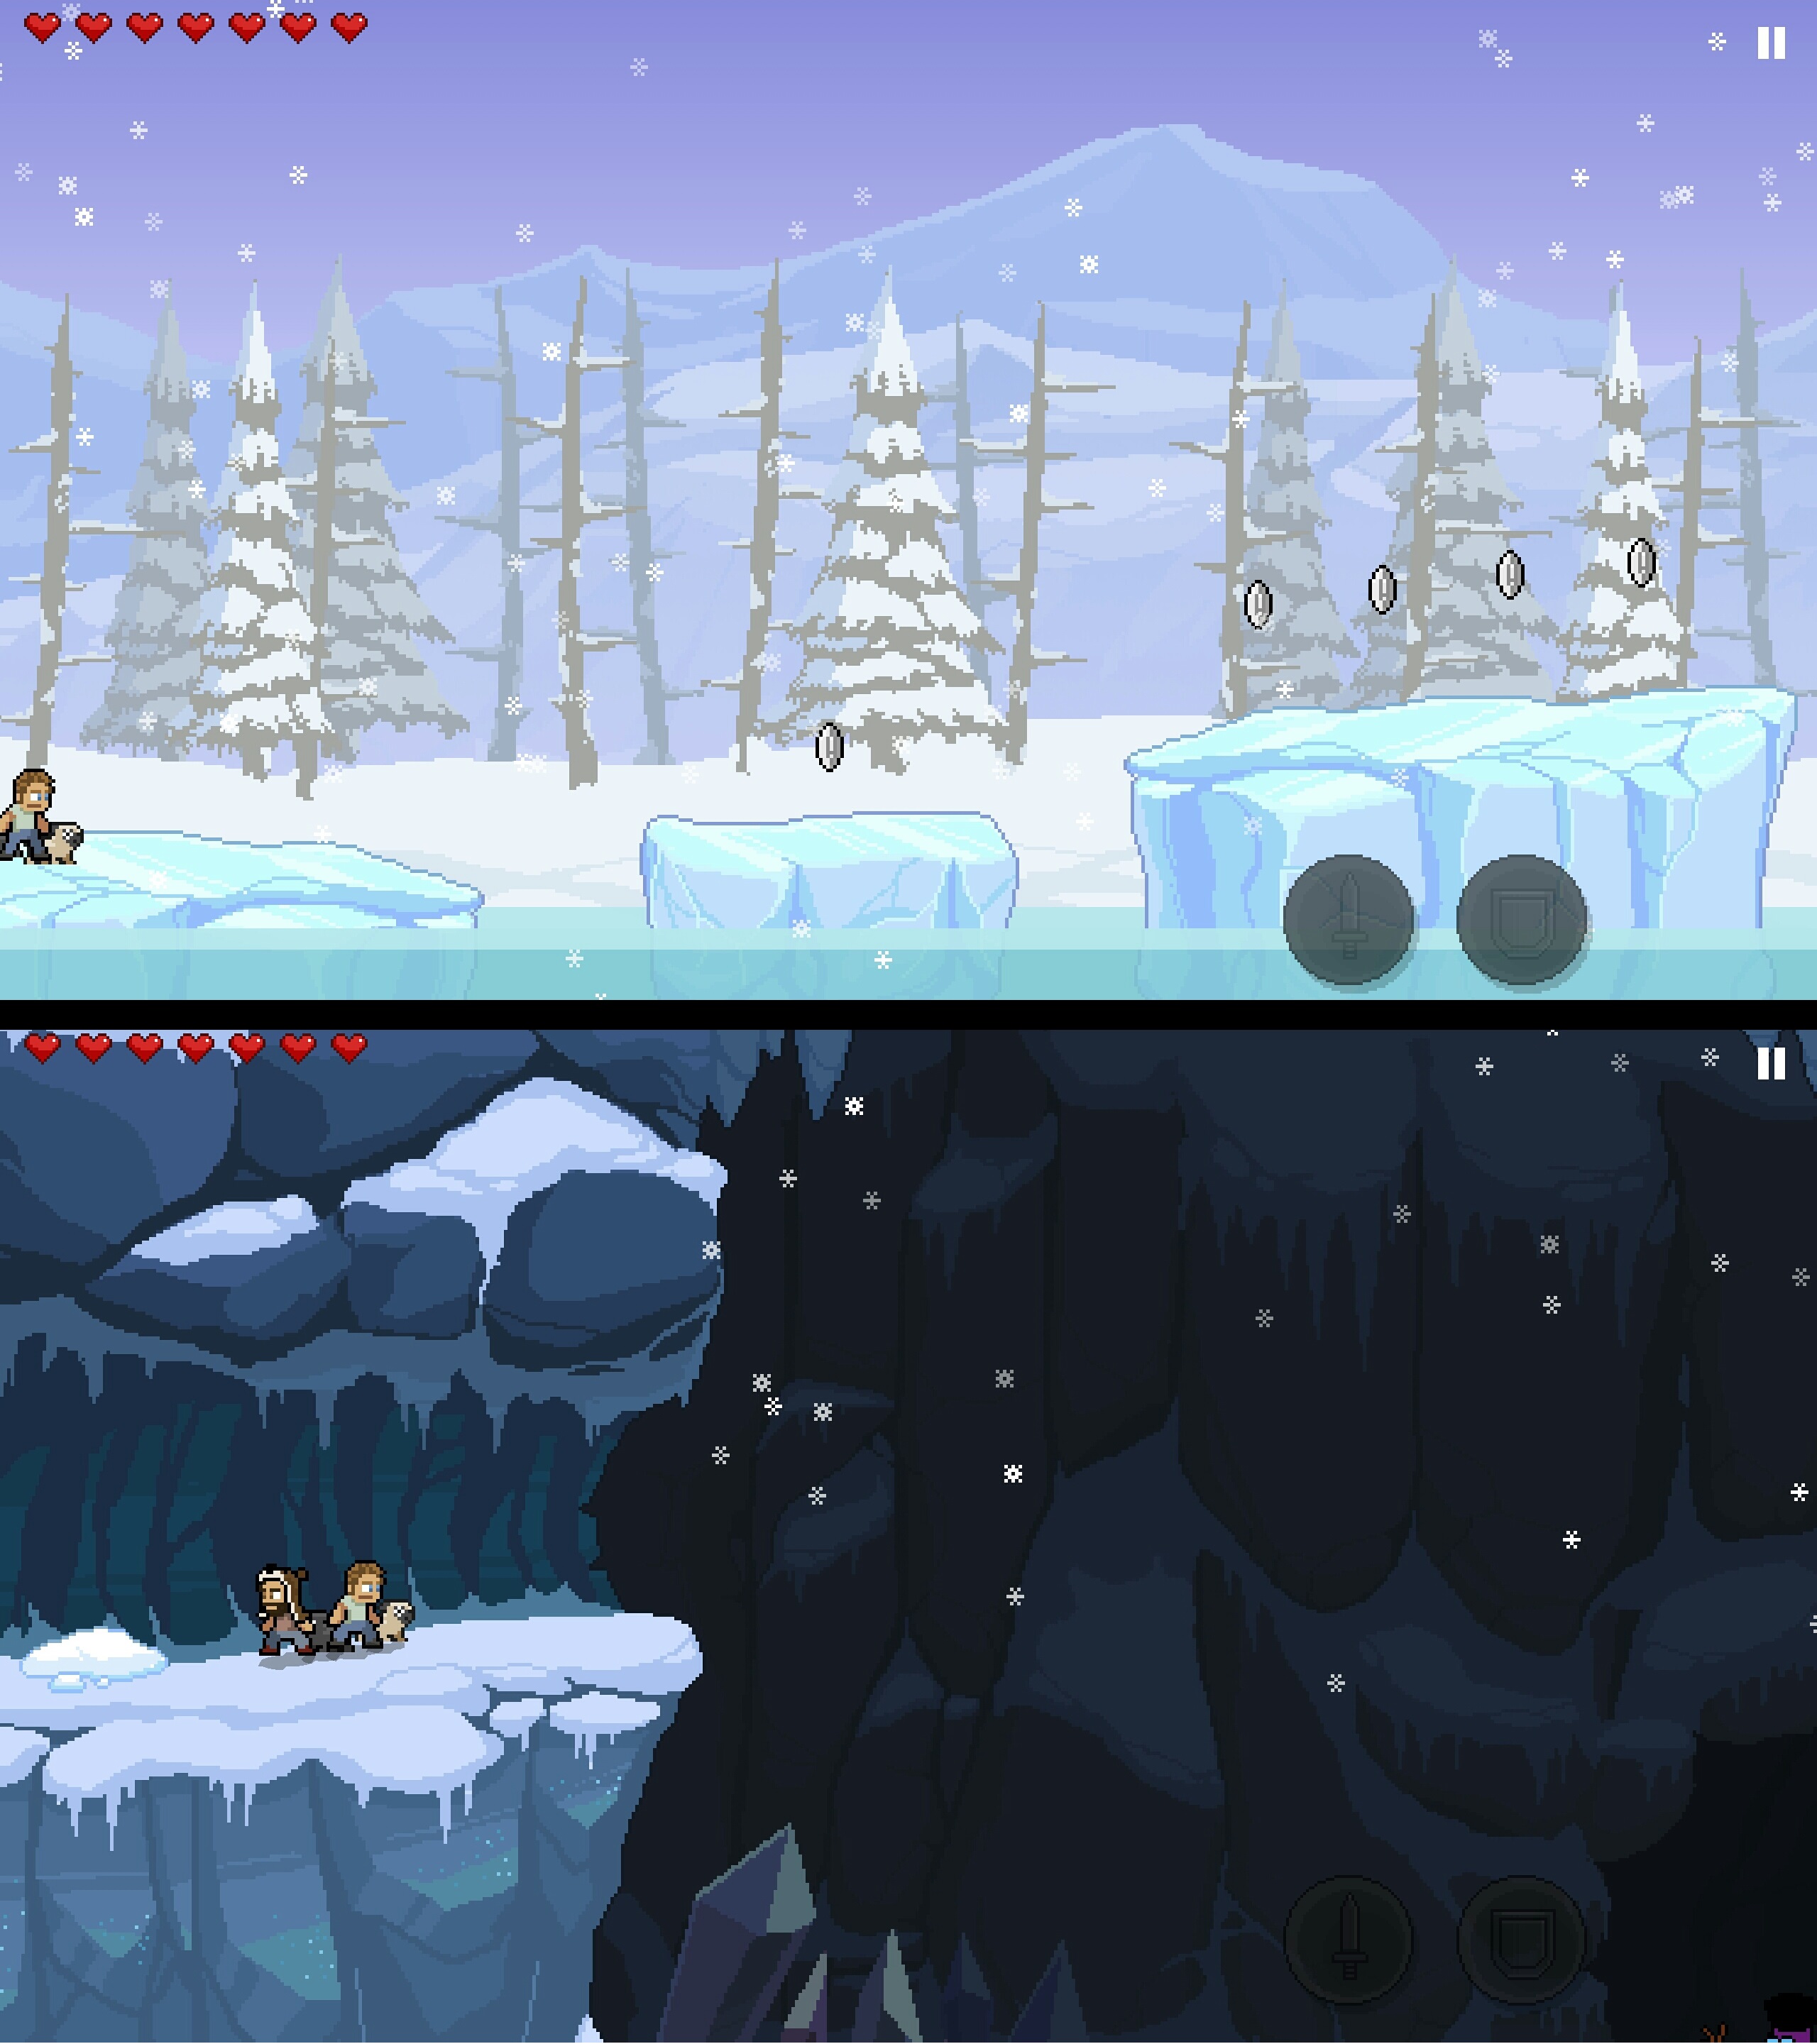 Two levels that have the same theme but create a very different 'mood' for the player.